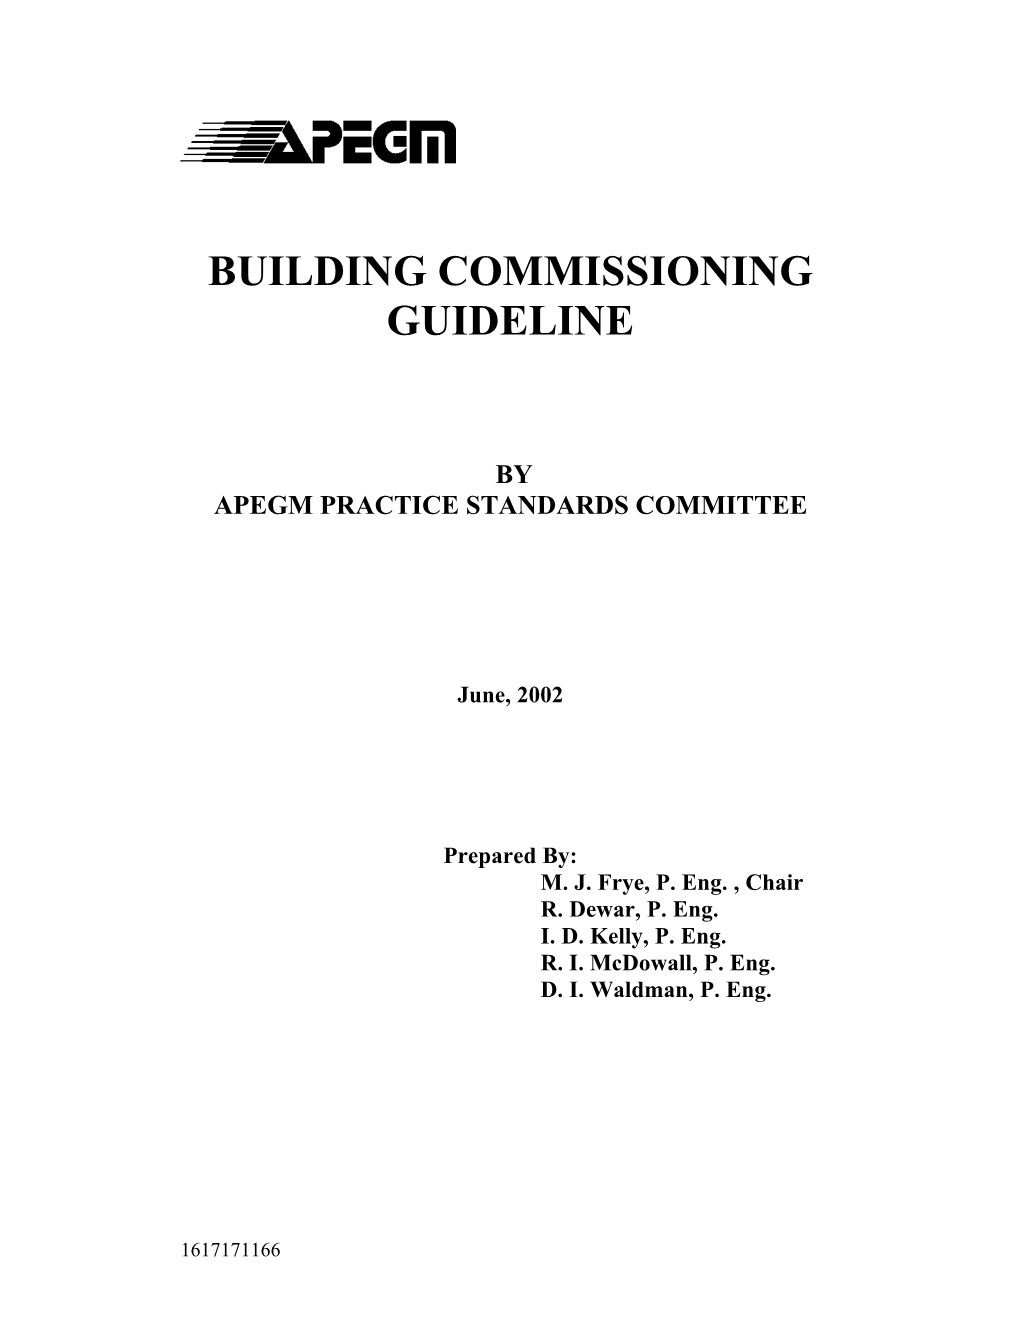 Building Commissioning Guideline